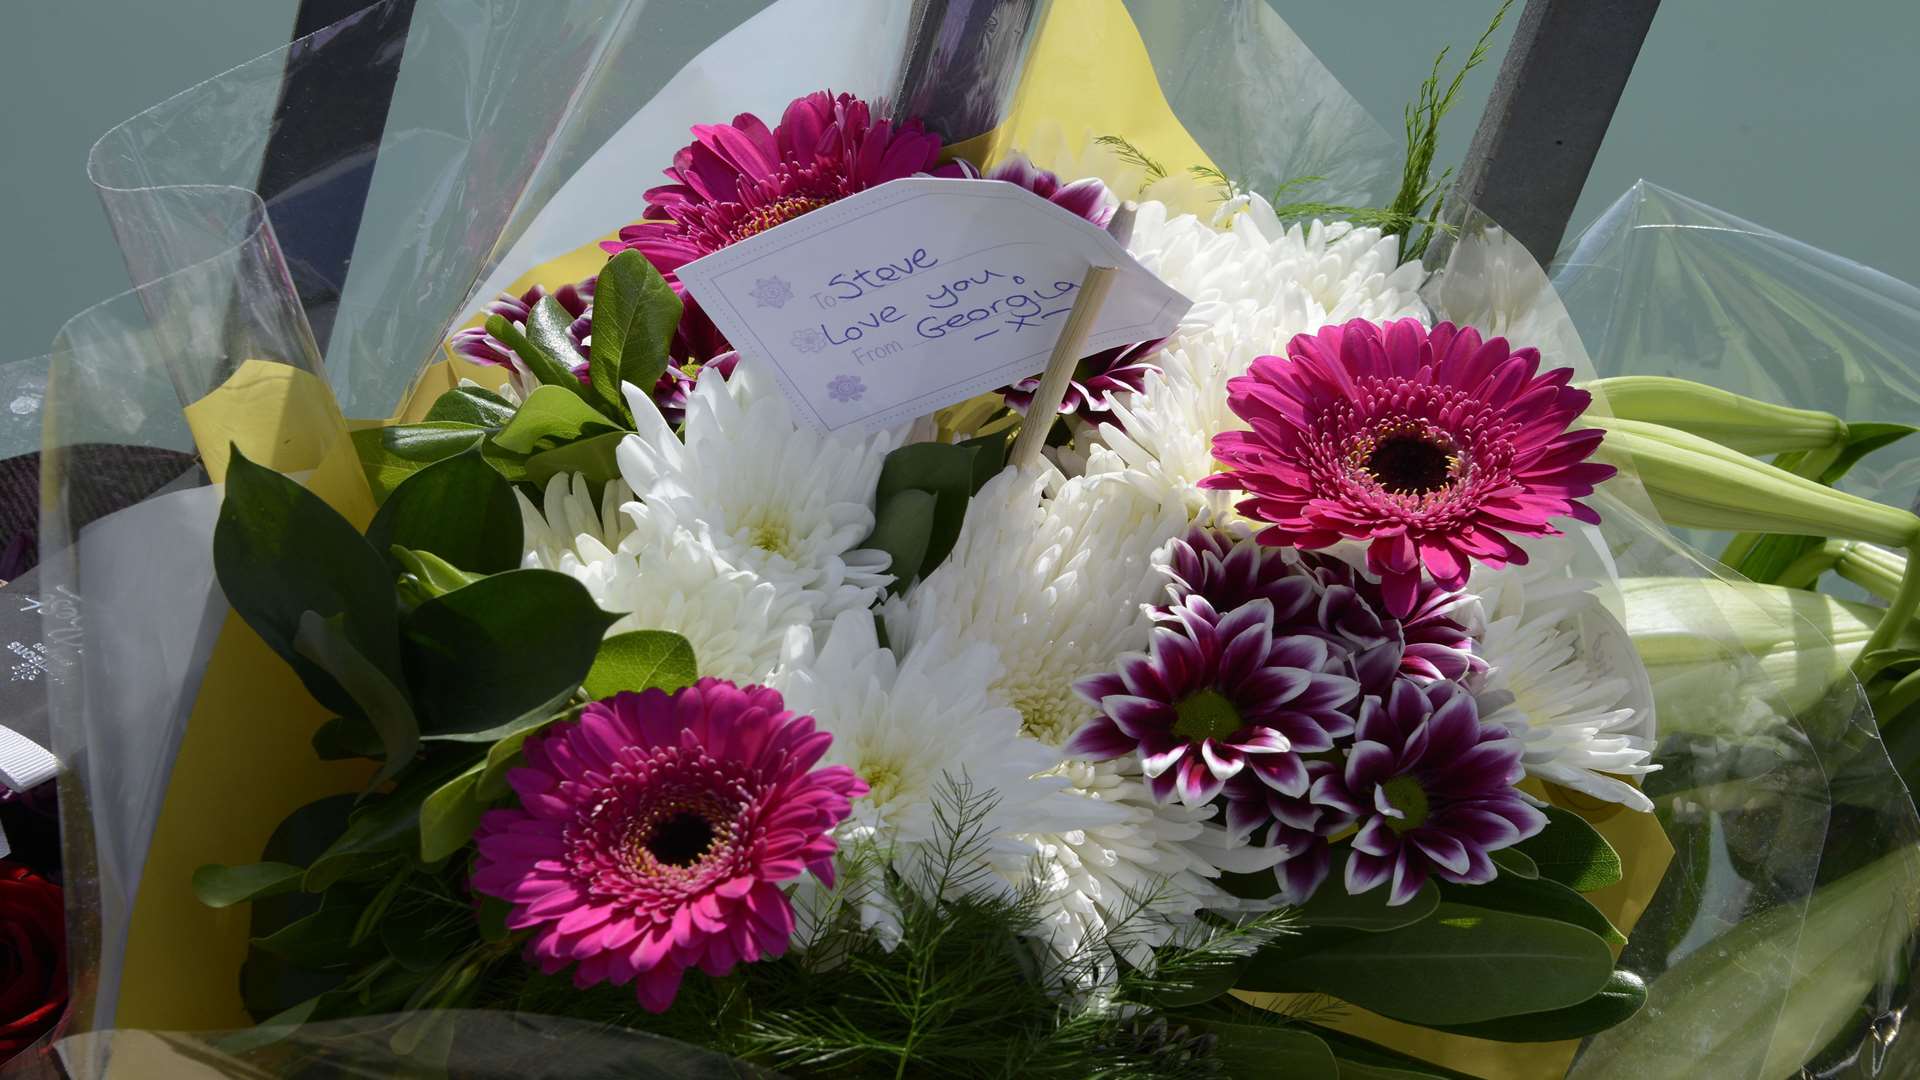 Tributes to 'Steve' at Folkestone harbour. Picture: Paul Amos